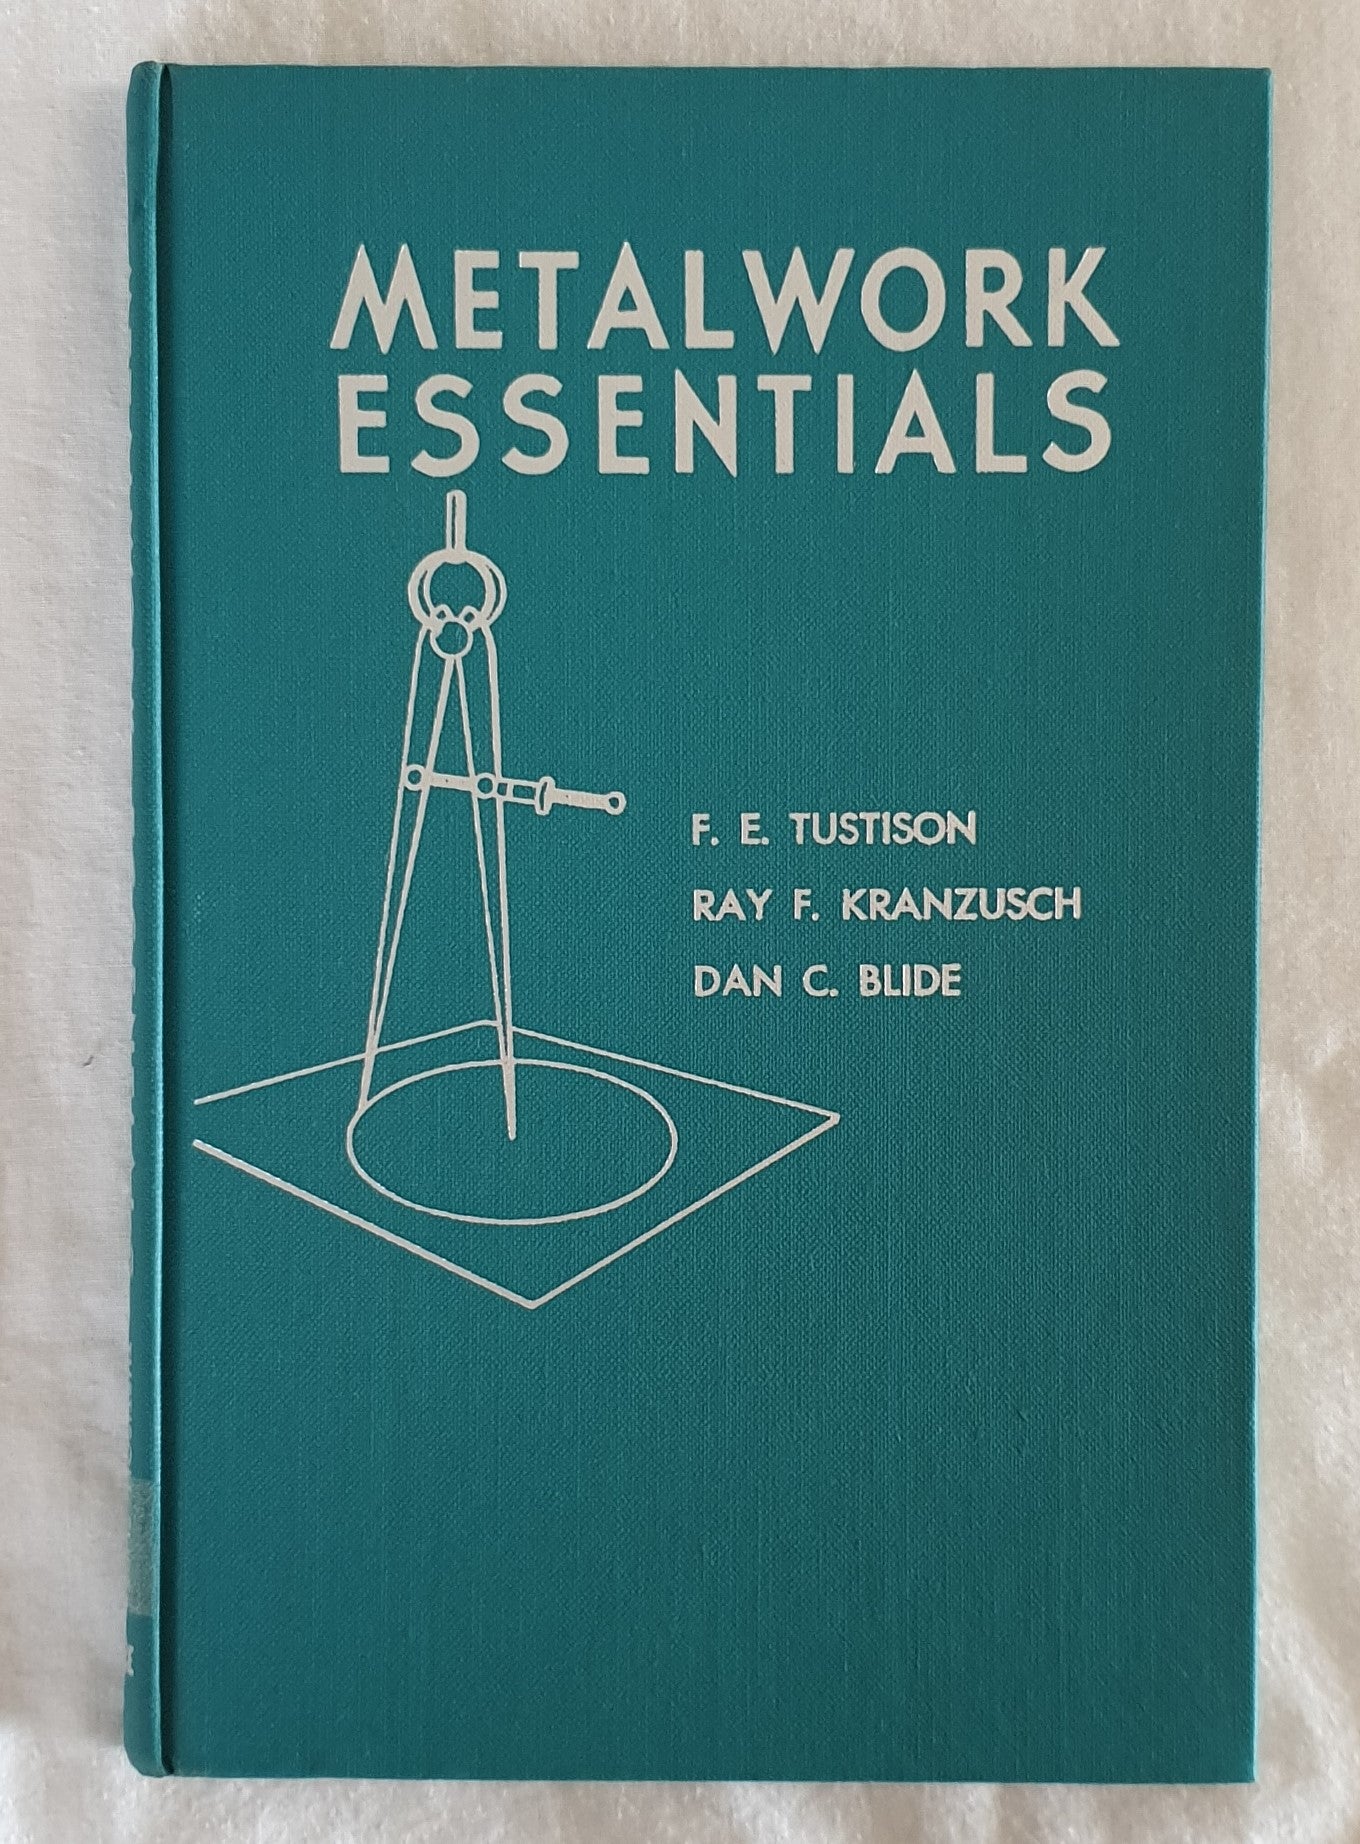 Metalwork Essentials  by F. E. Tustison, Ray F. Kranzusch and Dan C. Blide